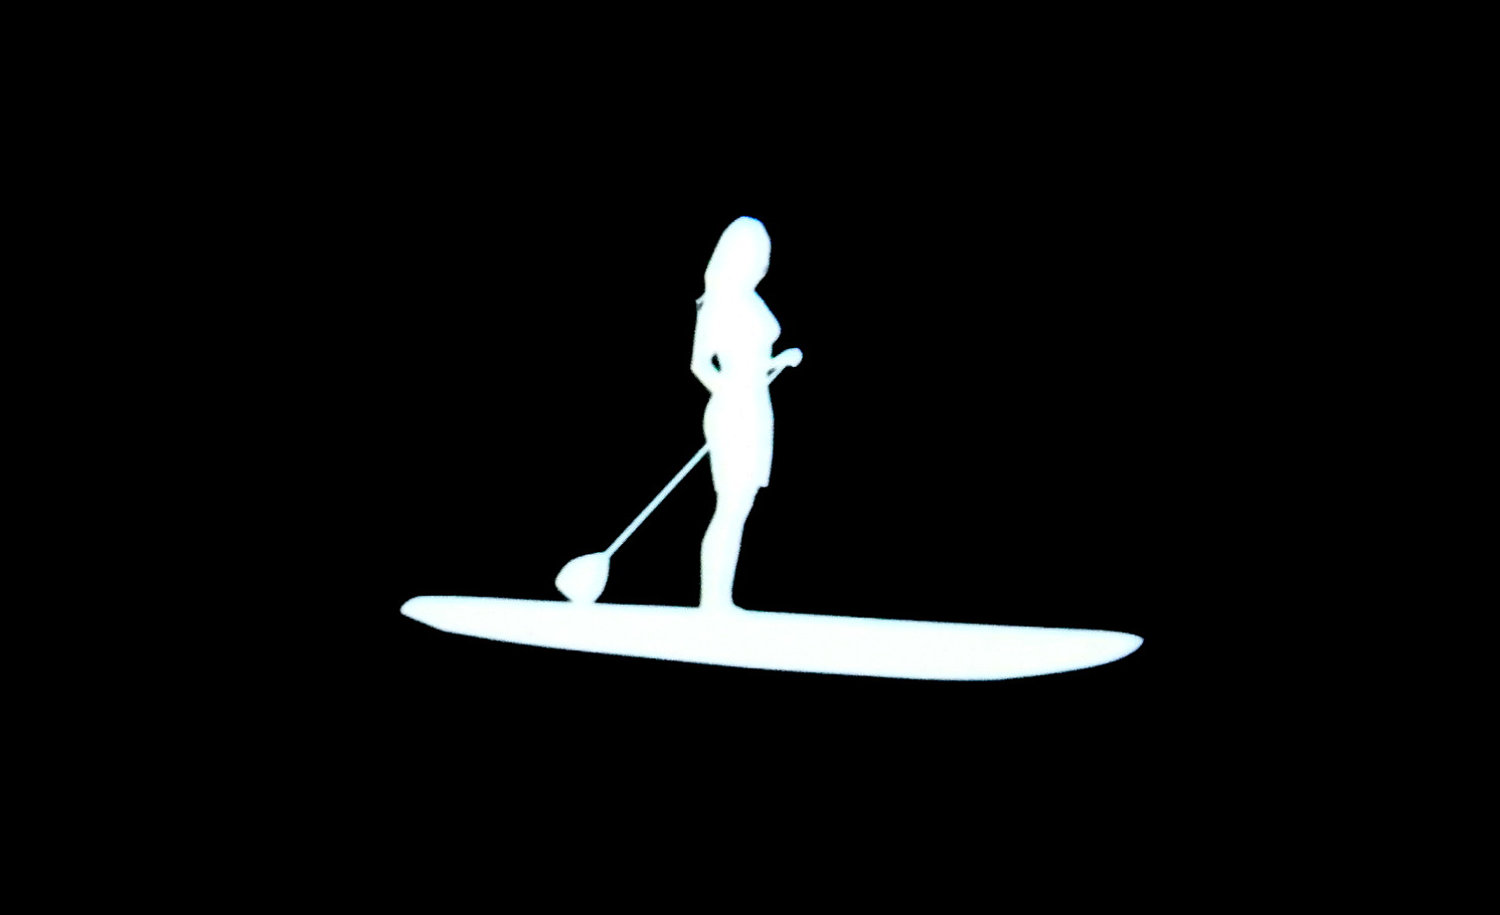 Stand Up Paddle Board Clip Art